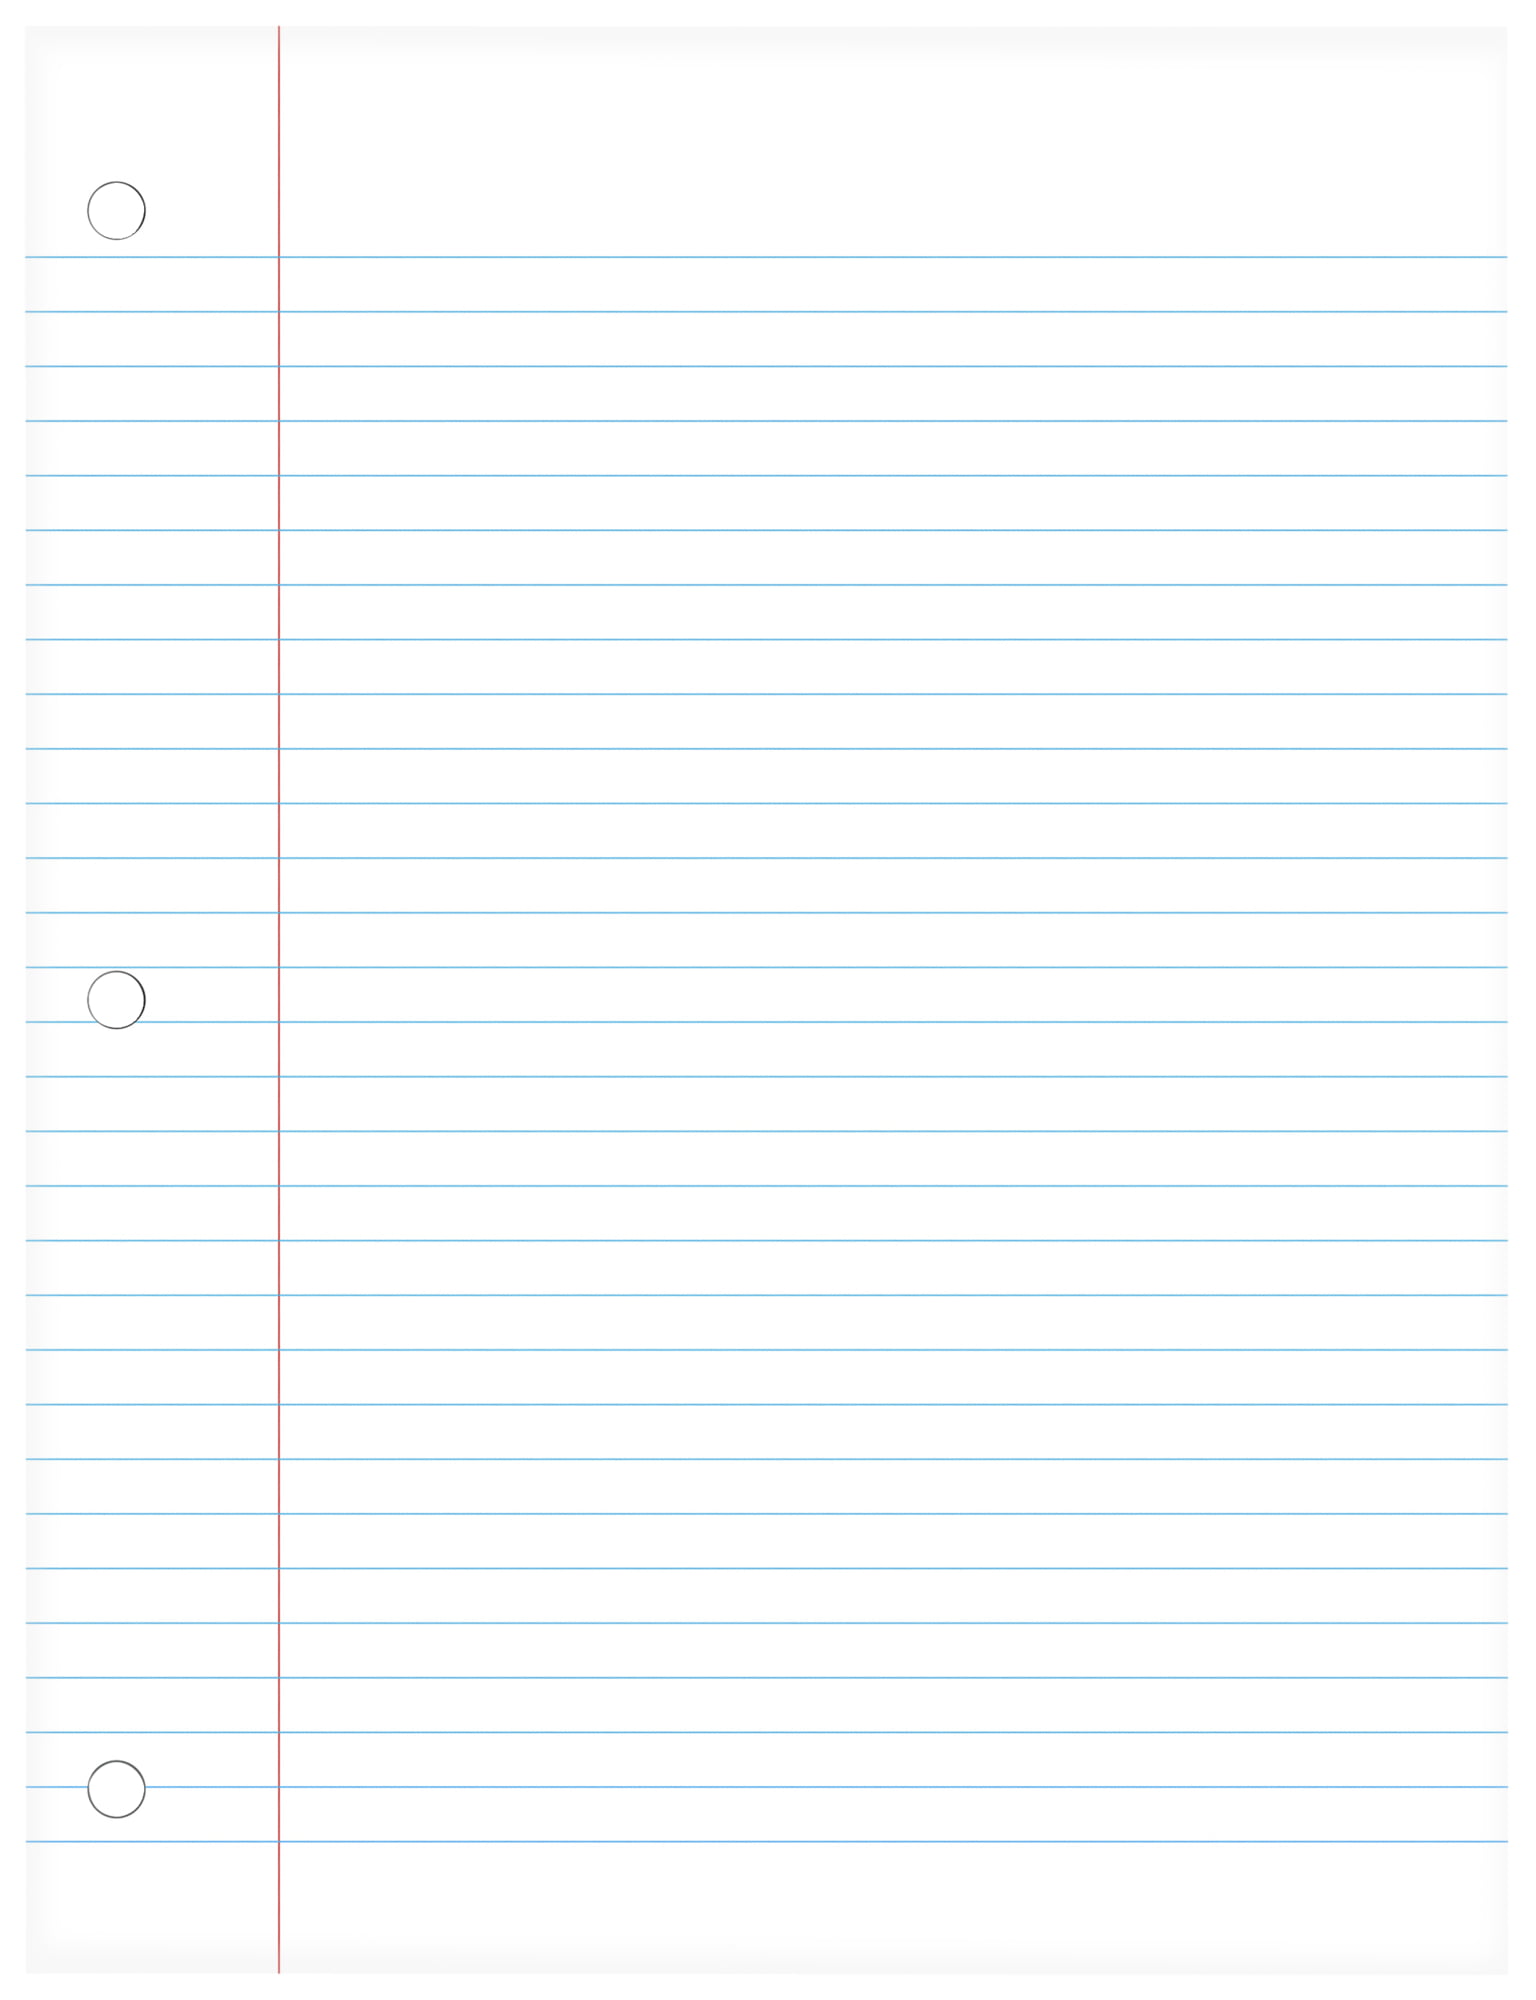 Green-Lined Writing Paper for Primary Students: 8.5 x 11 Inches, 0.4375  Inch Line Spacing, 3-Hole Punched